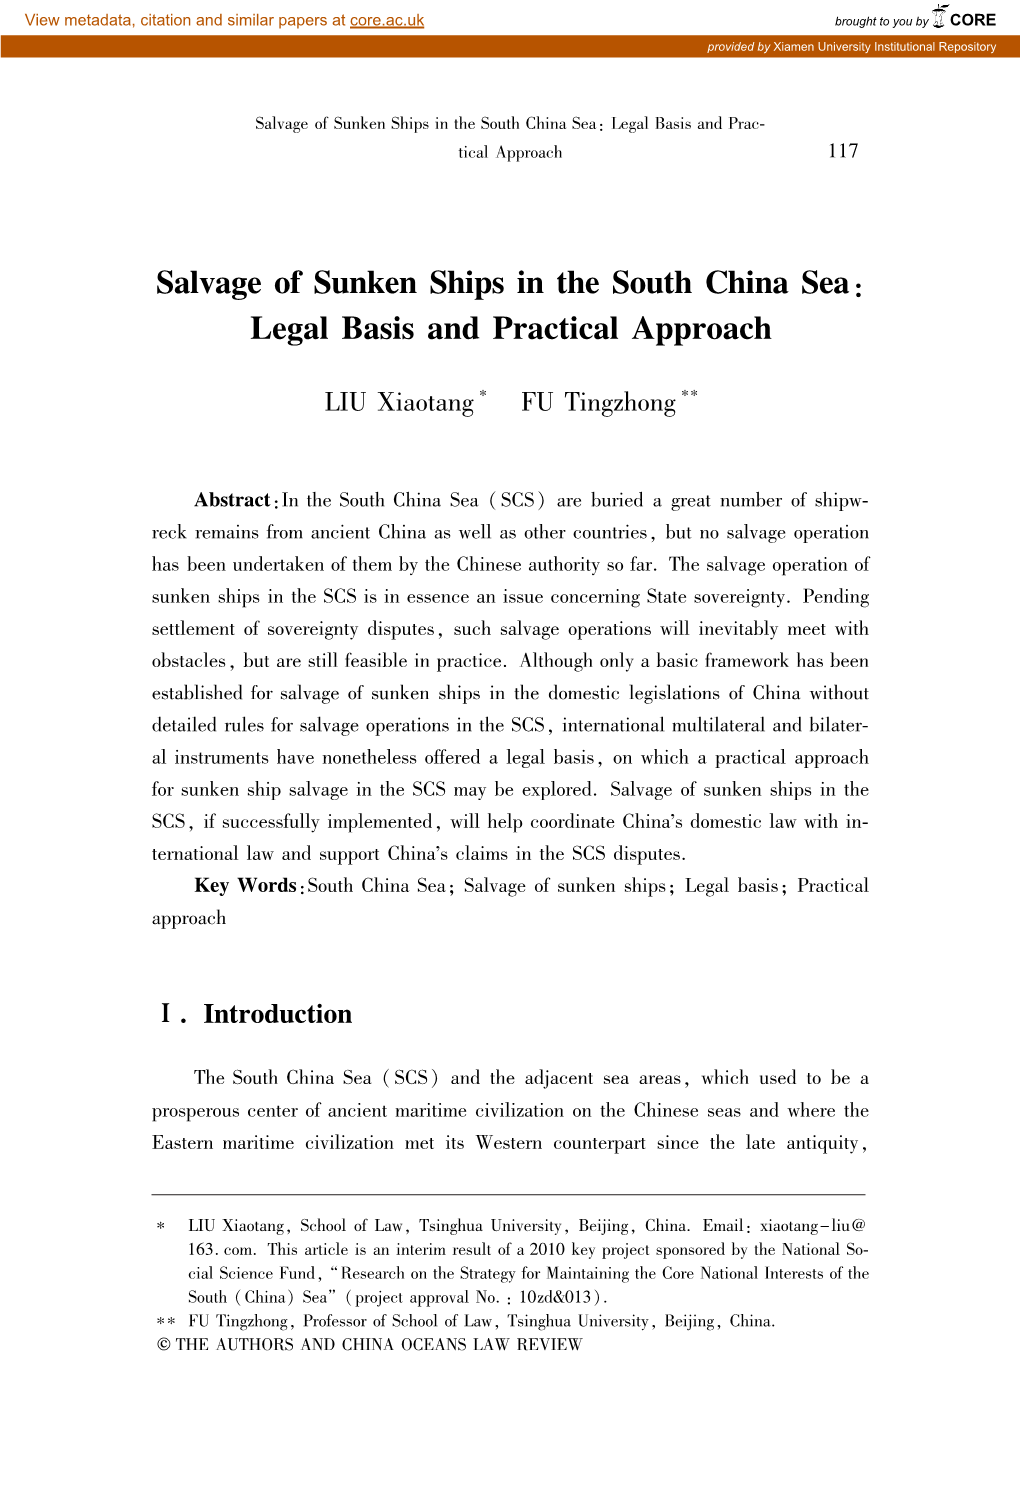 Salvage of Sunken Ships in the South China Sea: Legal Basis and Practical Approach